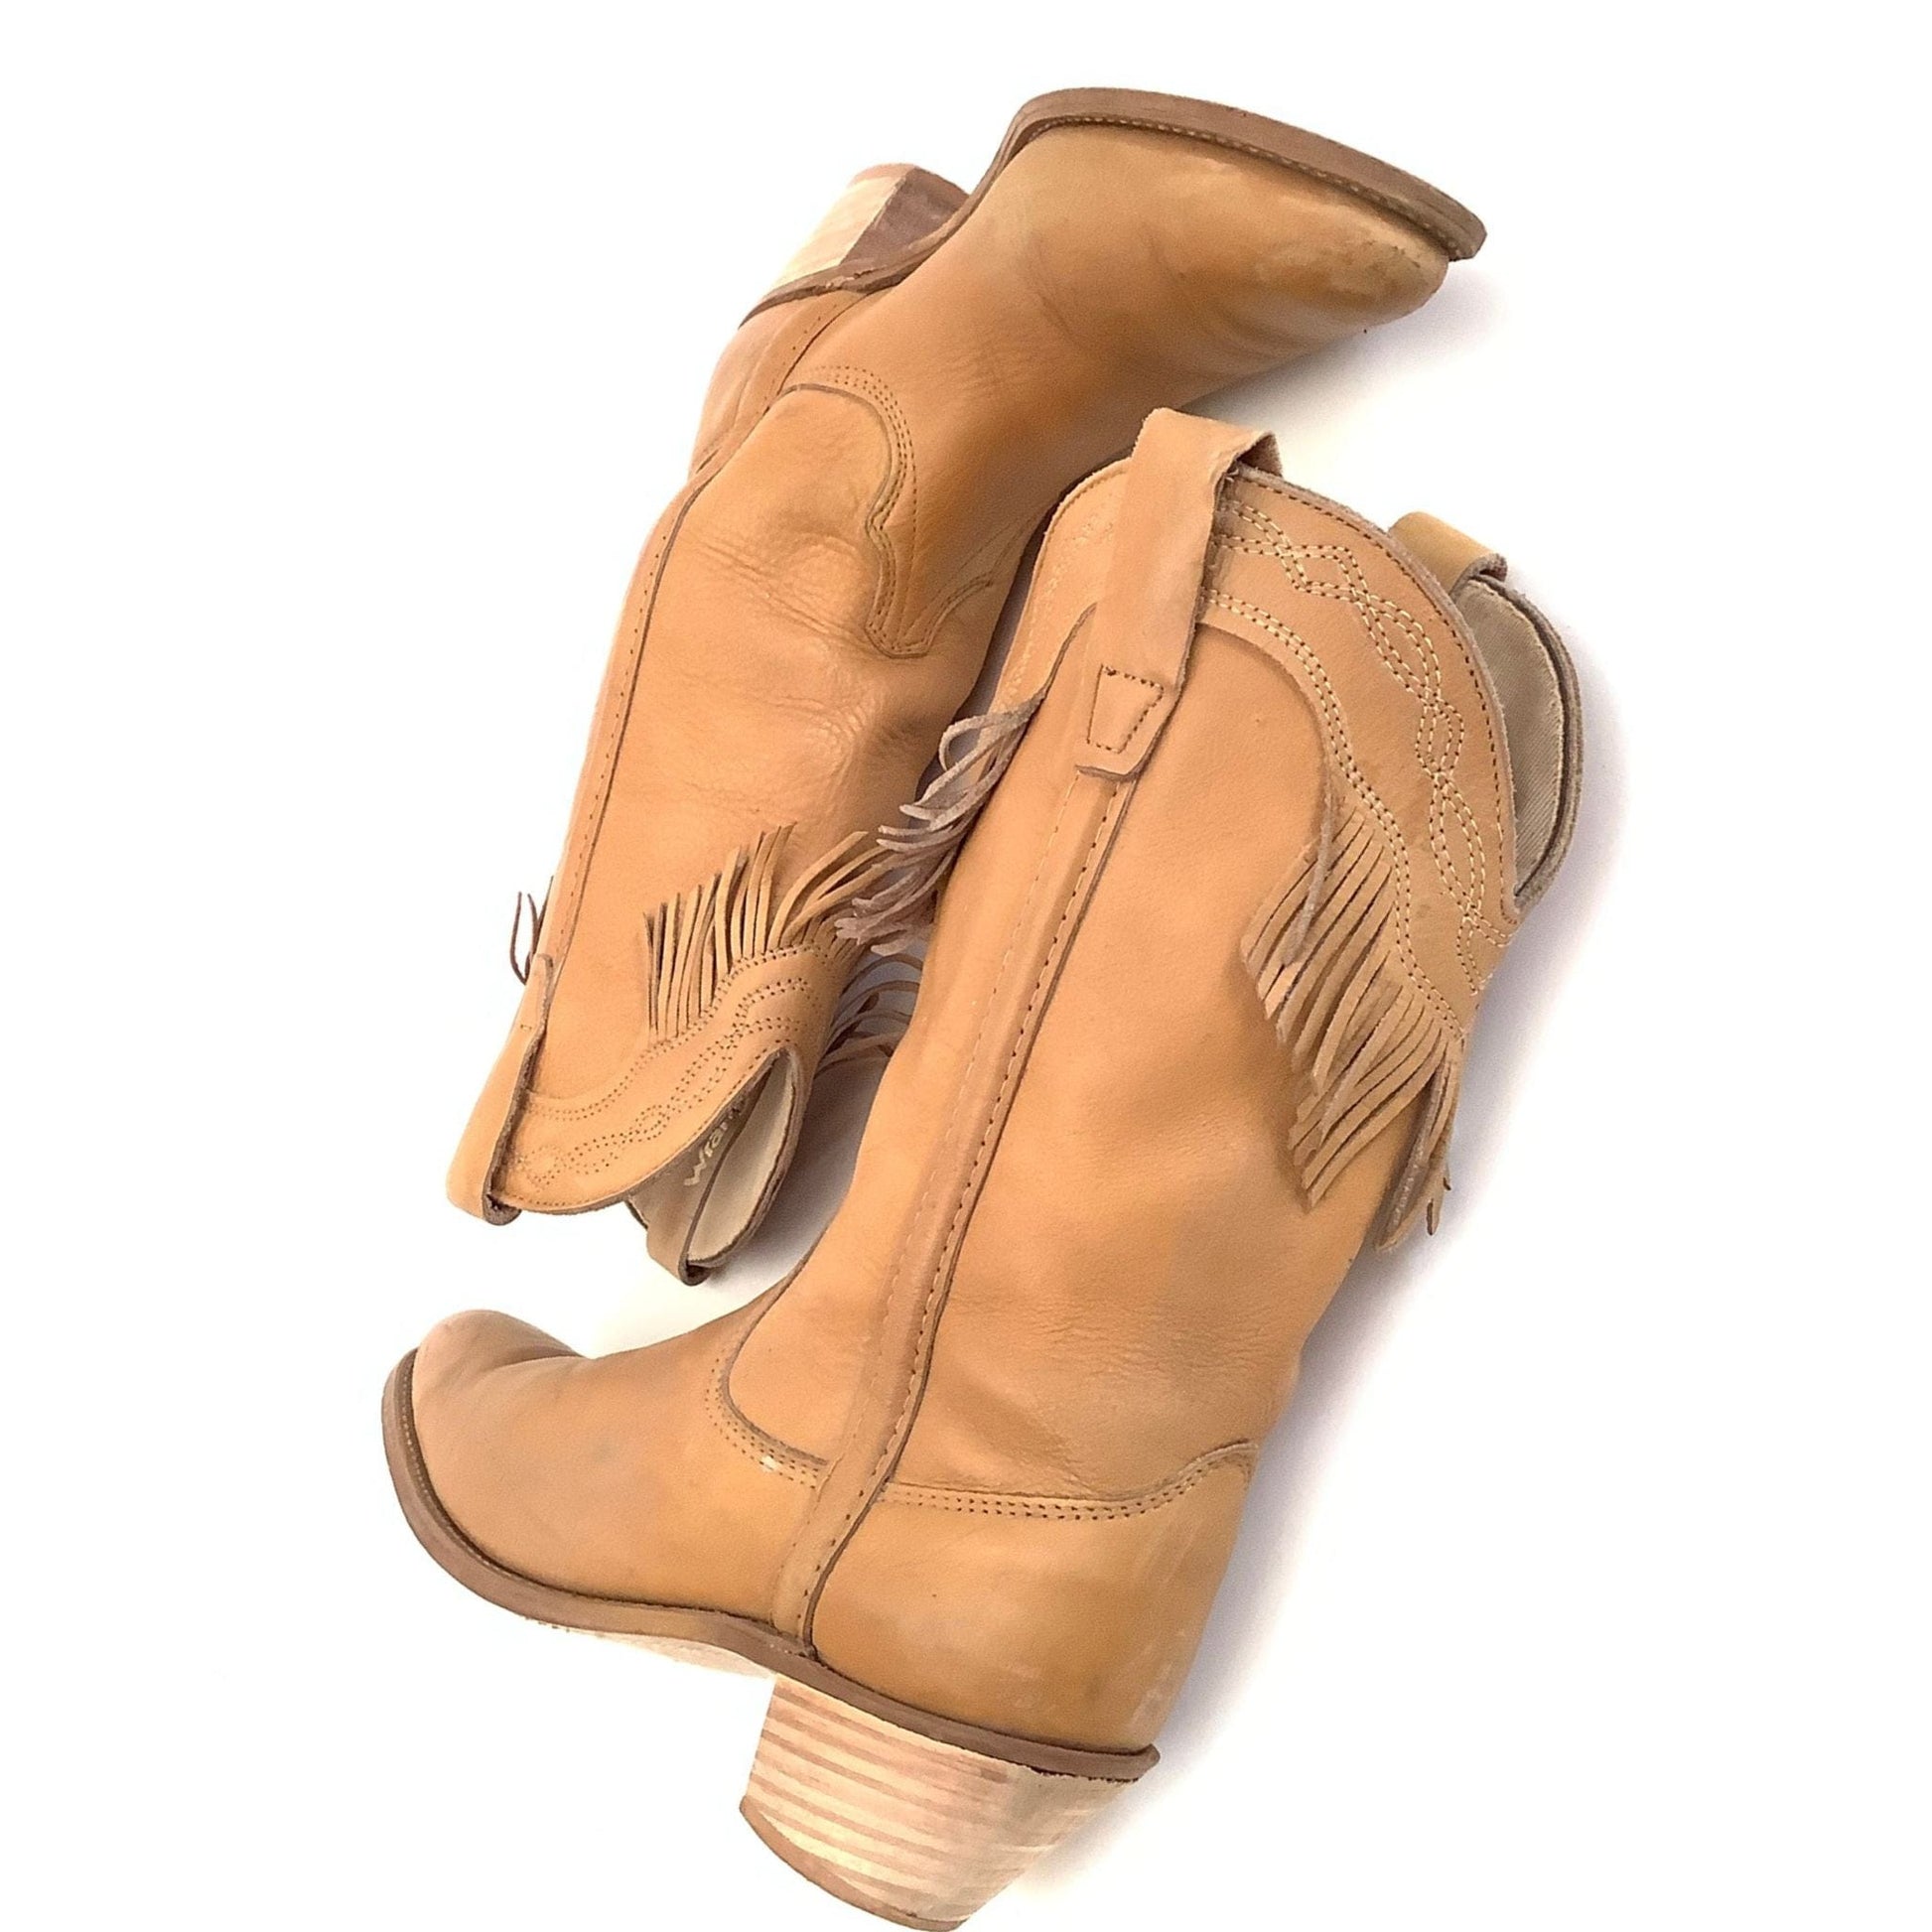 1970s Fringed Cowboy Boots 8 / Tan / Vintage 1970s